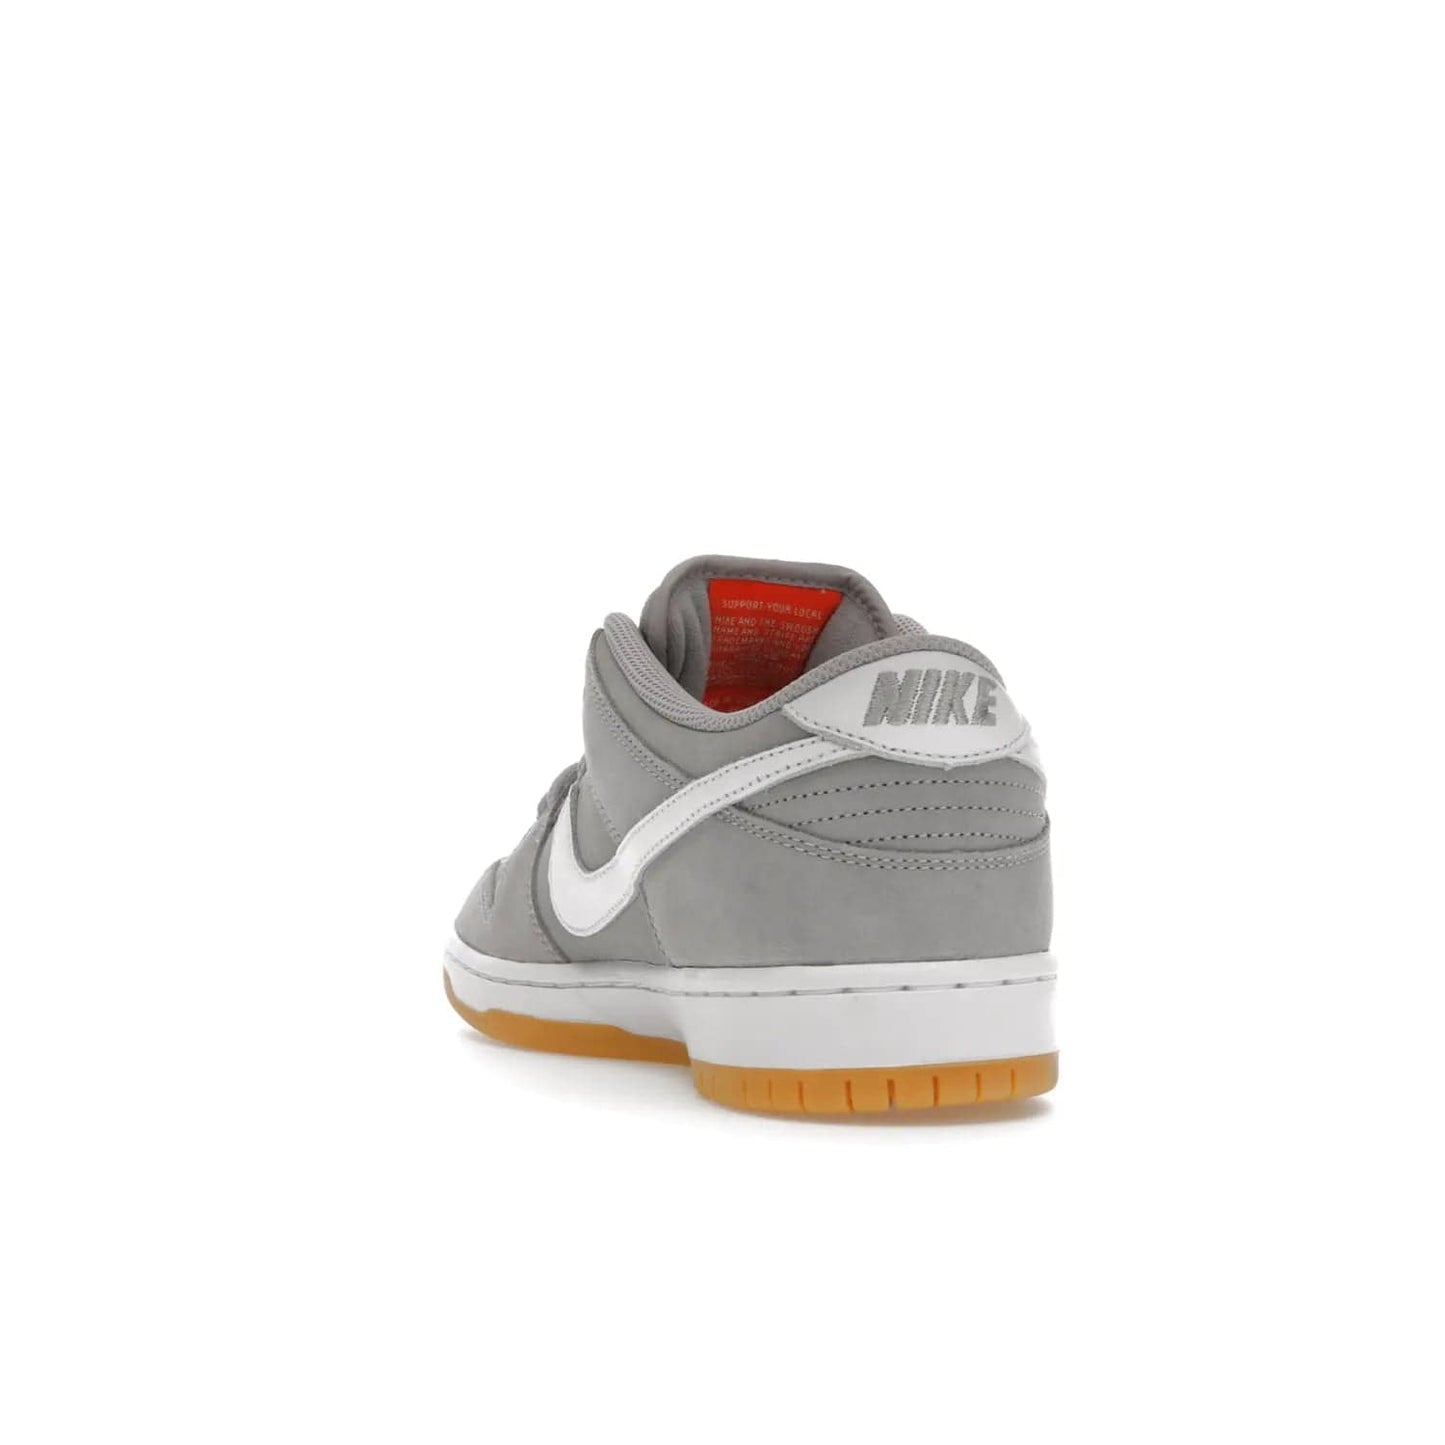 Nike SB Dunk Low Pro ISO Orange Label Wolf Grey Gum - Image 26 - Only at www.BallersClubKickz.com - Introducing Nike's SB Dunk Low Pro ISO Orange Label Wolf Grey Gum - a stylish shoe with a premium Wolf Grey upper, white leather Nike Swoosh, and an eye-catching gum outsole. With special Nike branding and packaging, this shoe adds a unique fashion statement. Out Feb. 24, 2023.